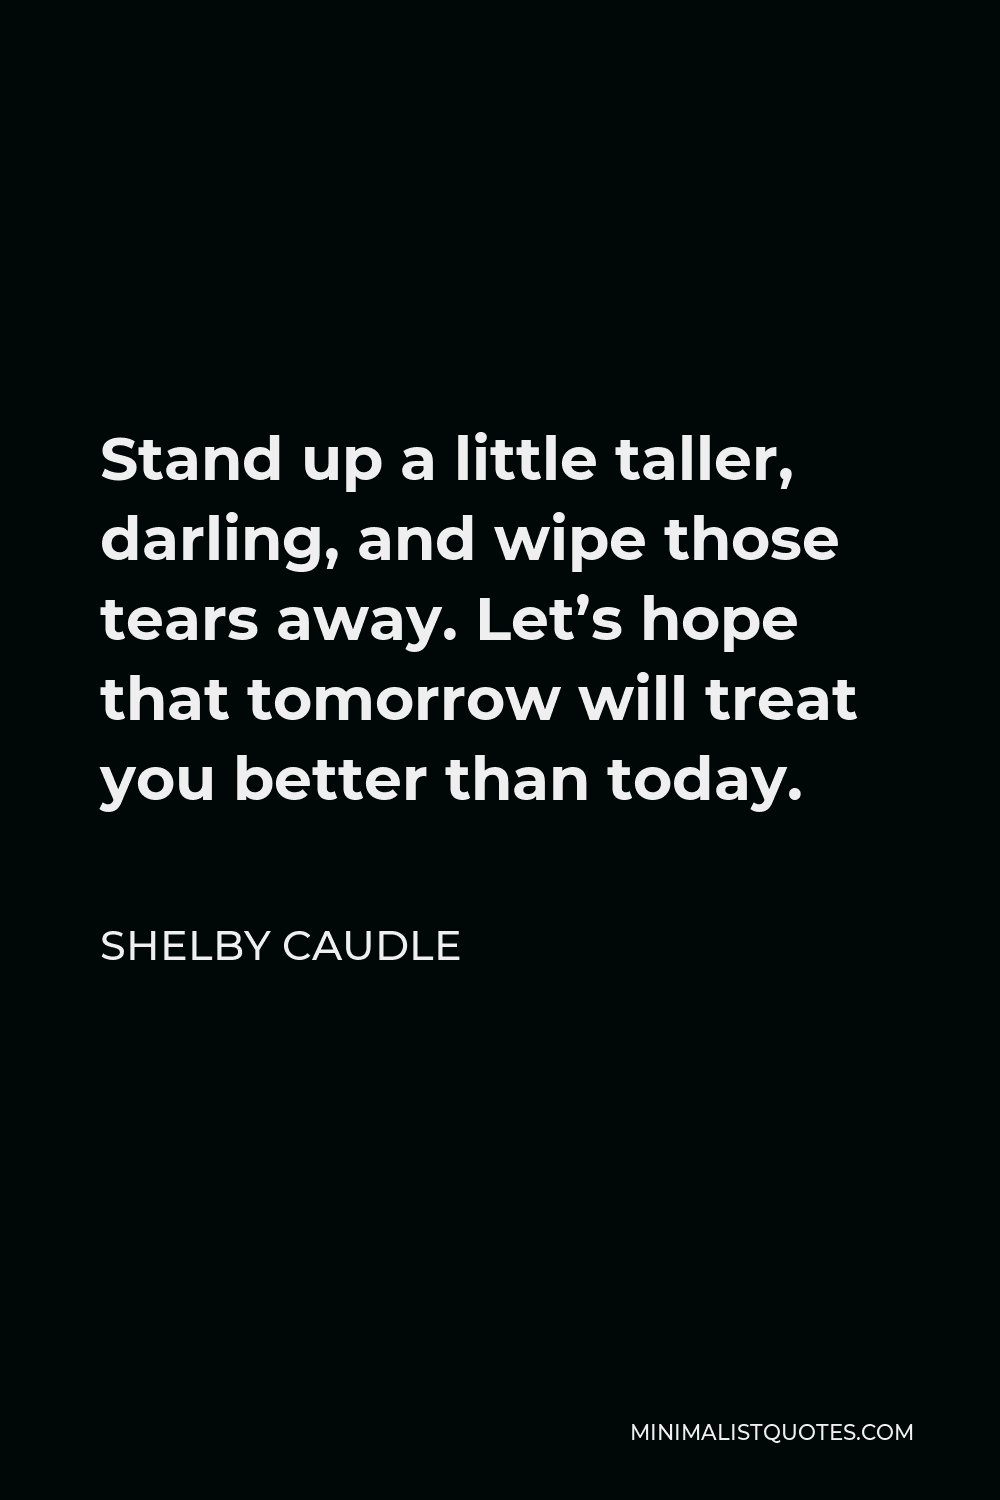 Shelby Caudle Quote - Stand up a little taller, darling, and wipe those tears away. Let’s hope that tomorrow will treat you better than today.